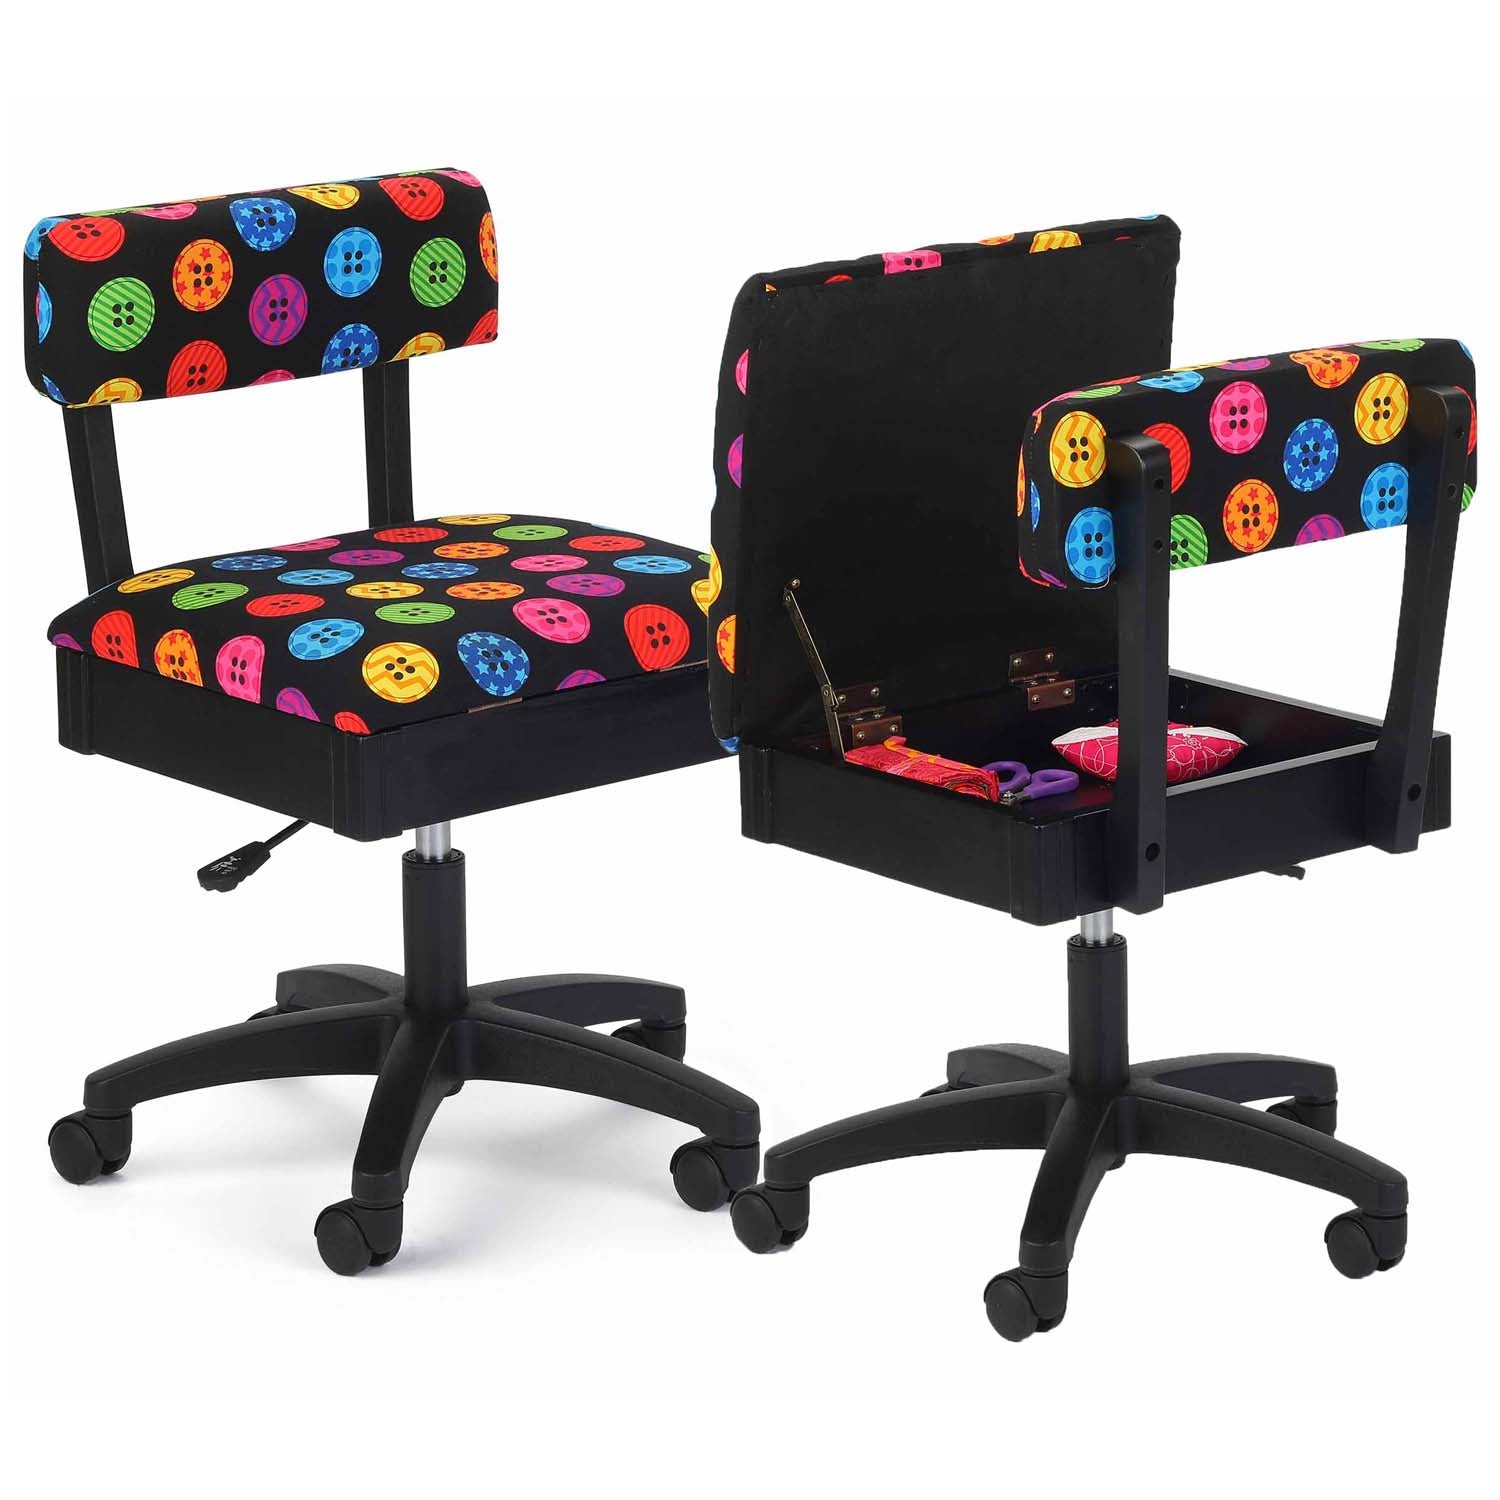 Arrow Sewing Chair!  Arrow's Sewing Chair is one of our most